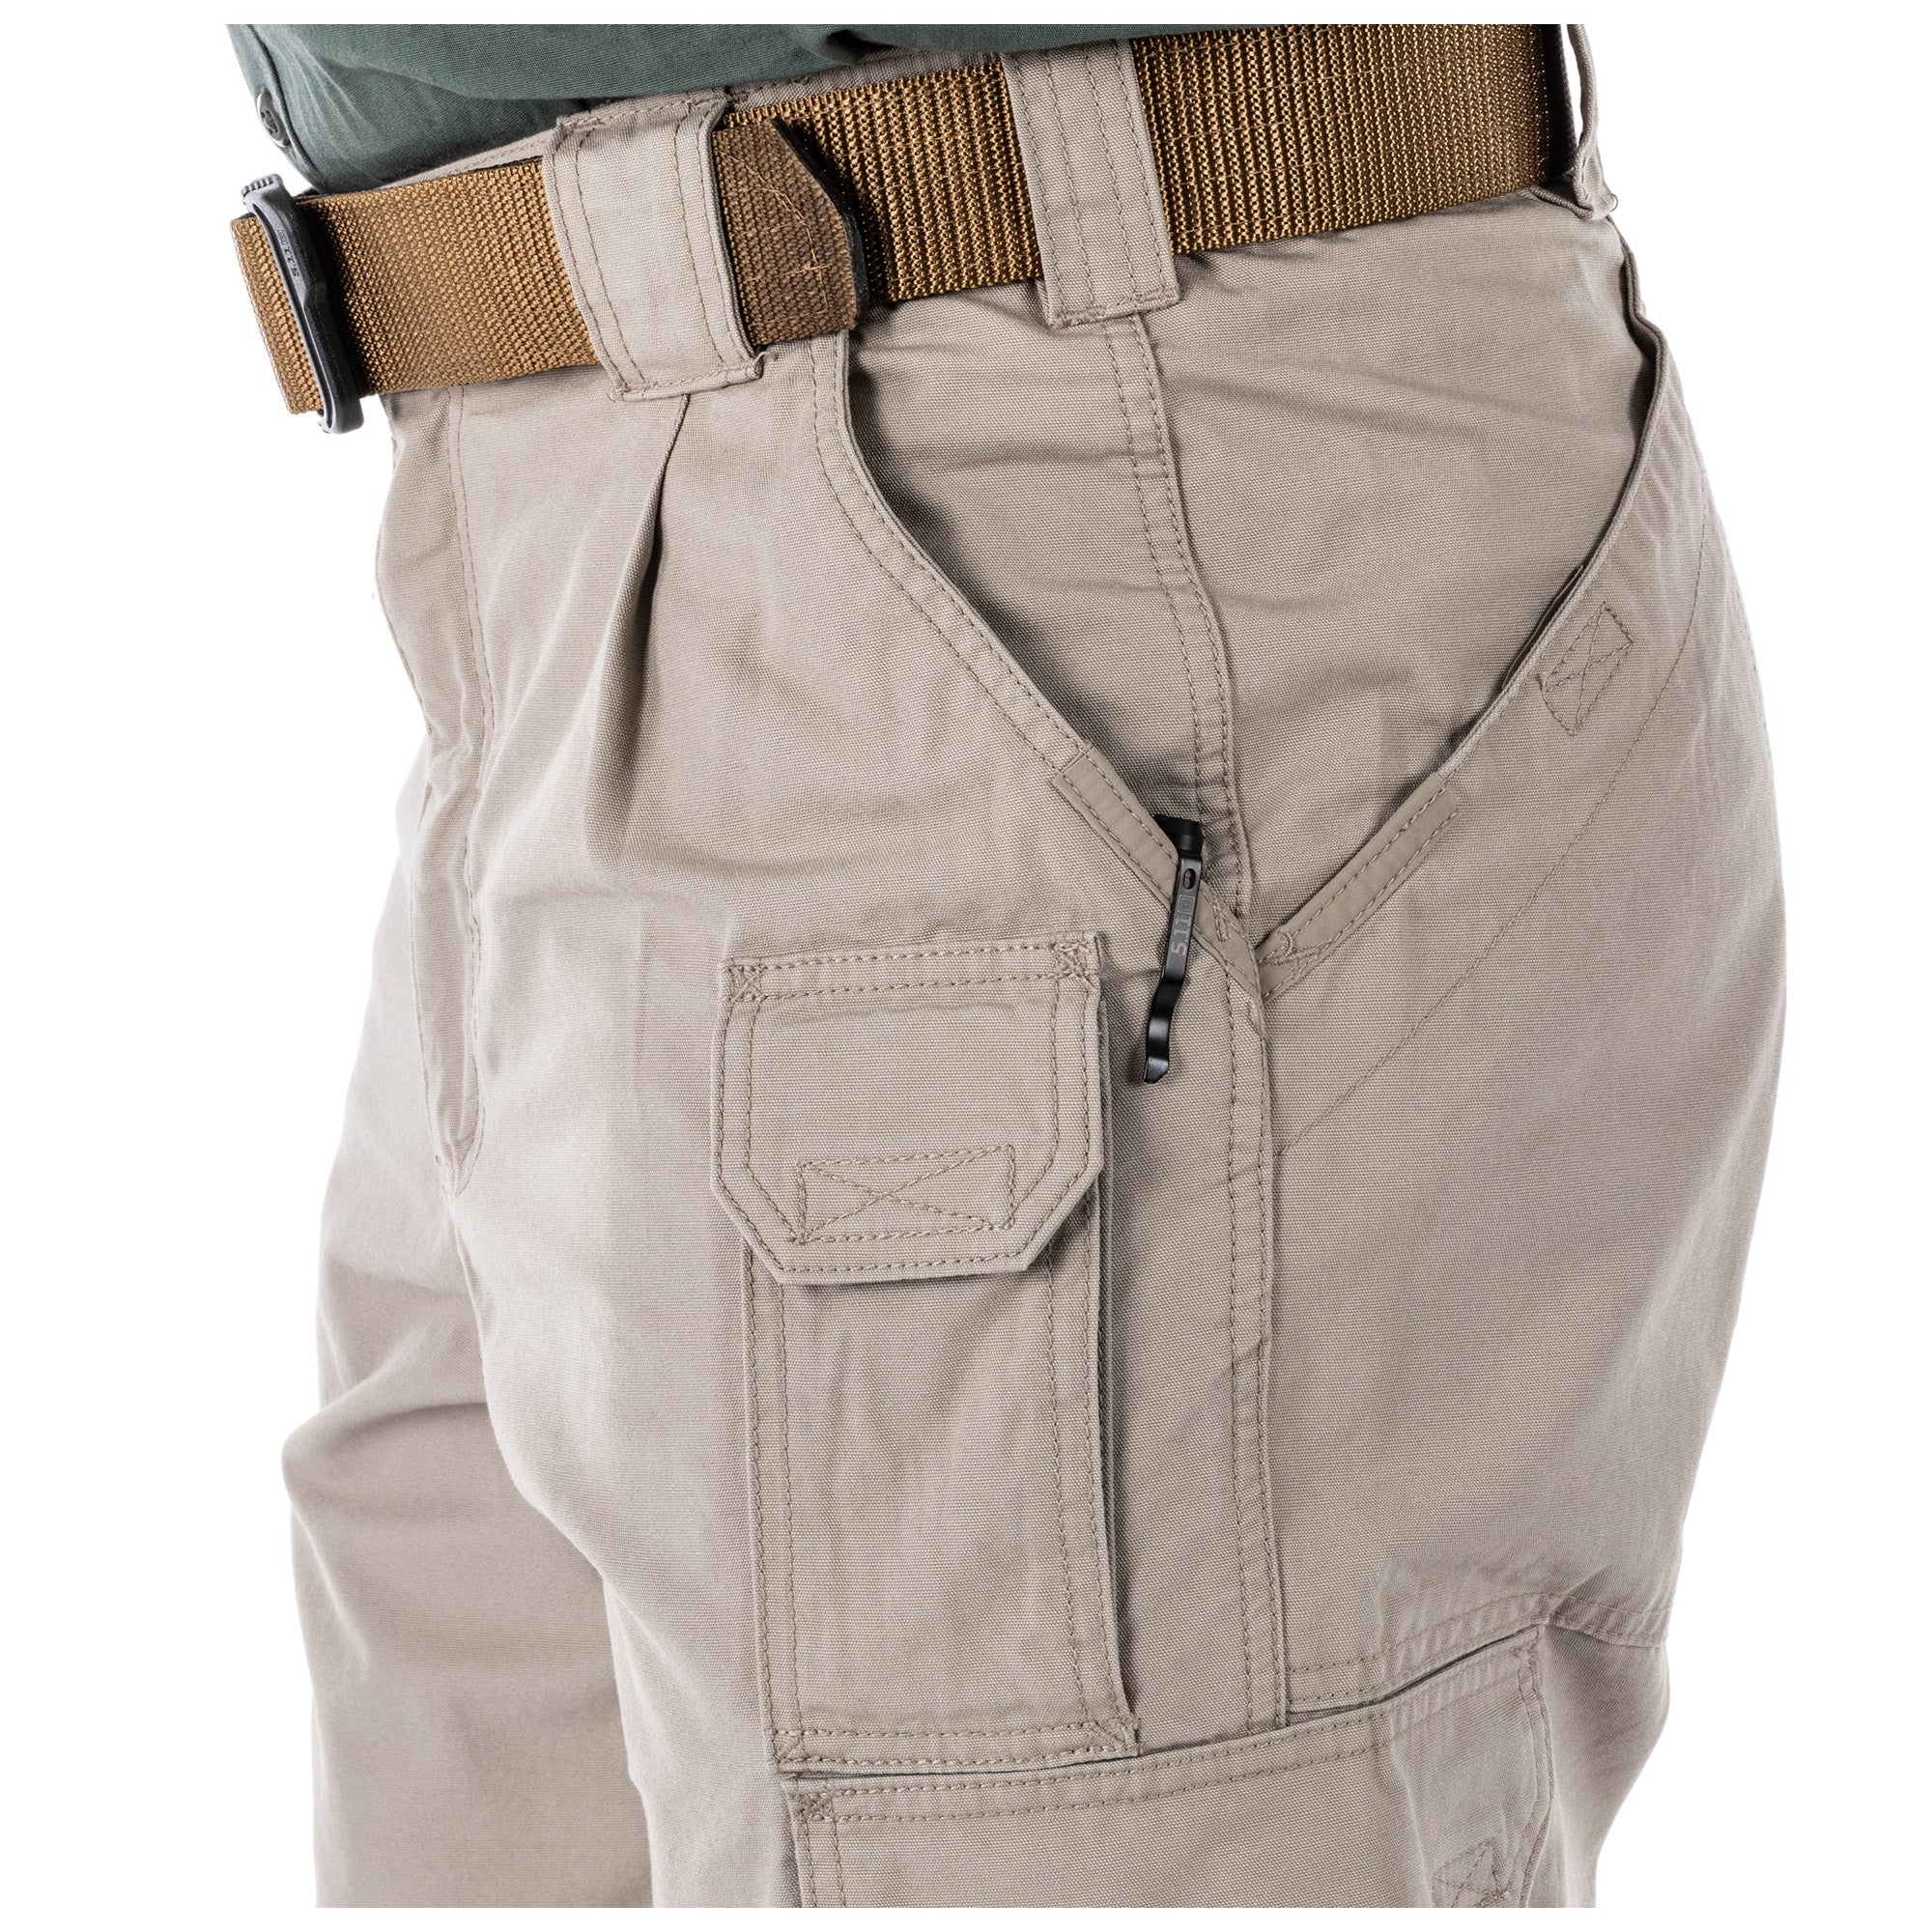 511 Tactical Pants 3230 fit 3228 Cargo RipStop Poly Cotton Canvas  Mens  Full On Cinema